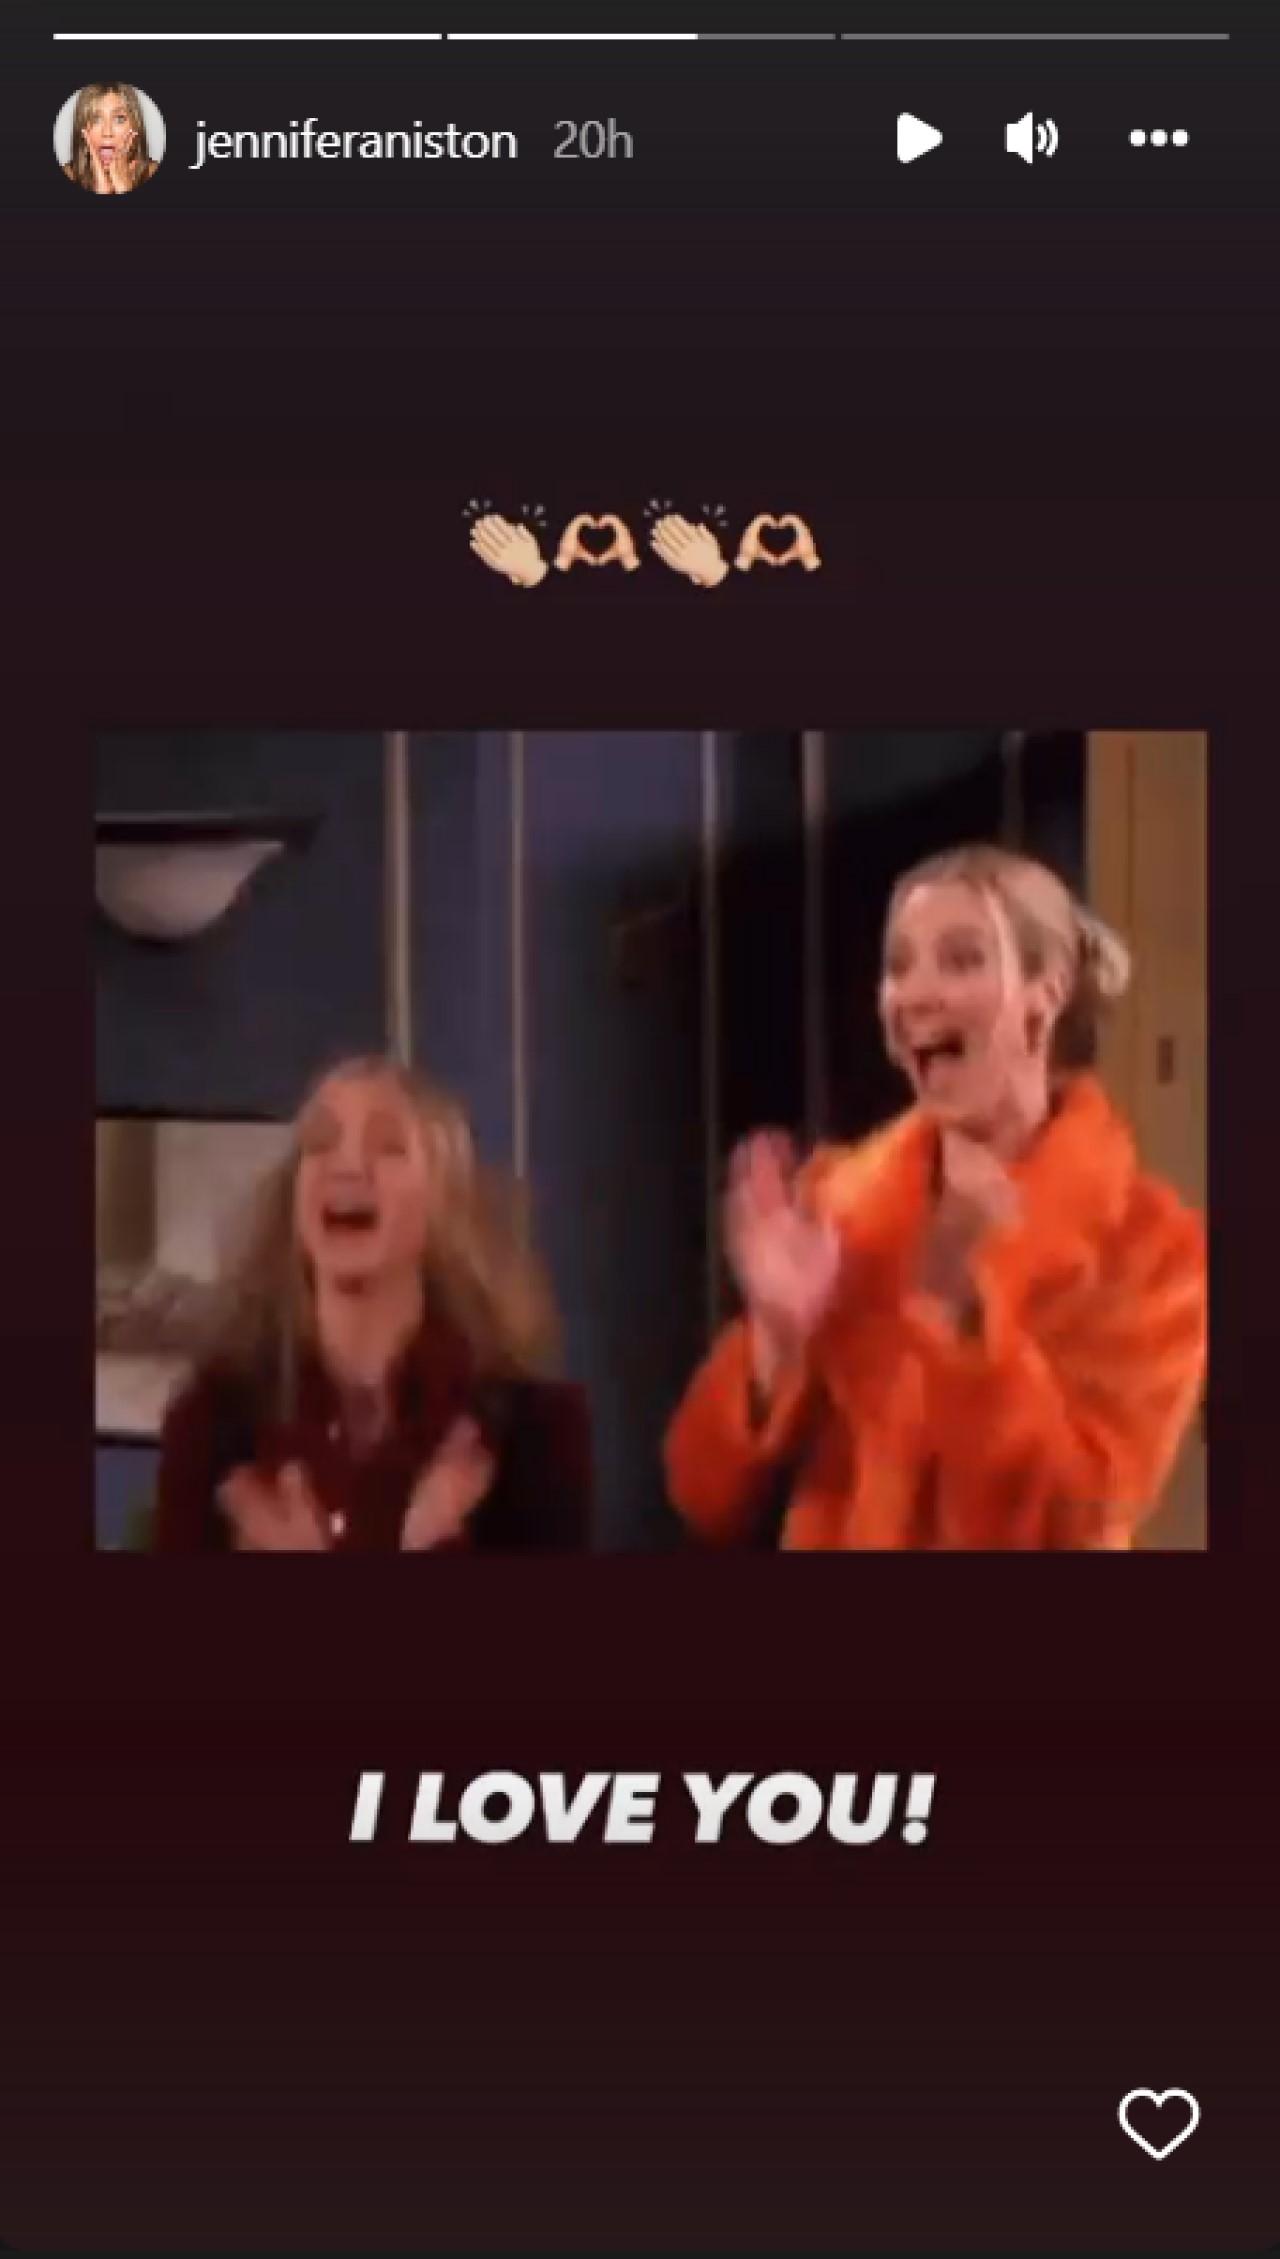 Jennifer Aniston and Lisa Kudrow in scene from Friends posted to Instagram Stories.